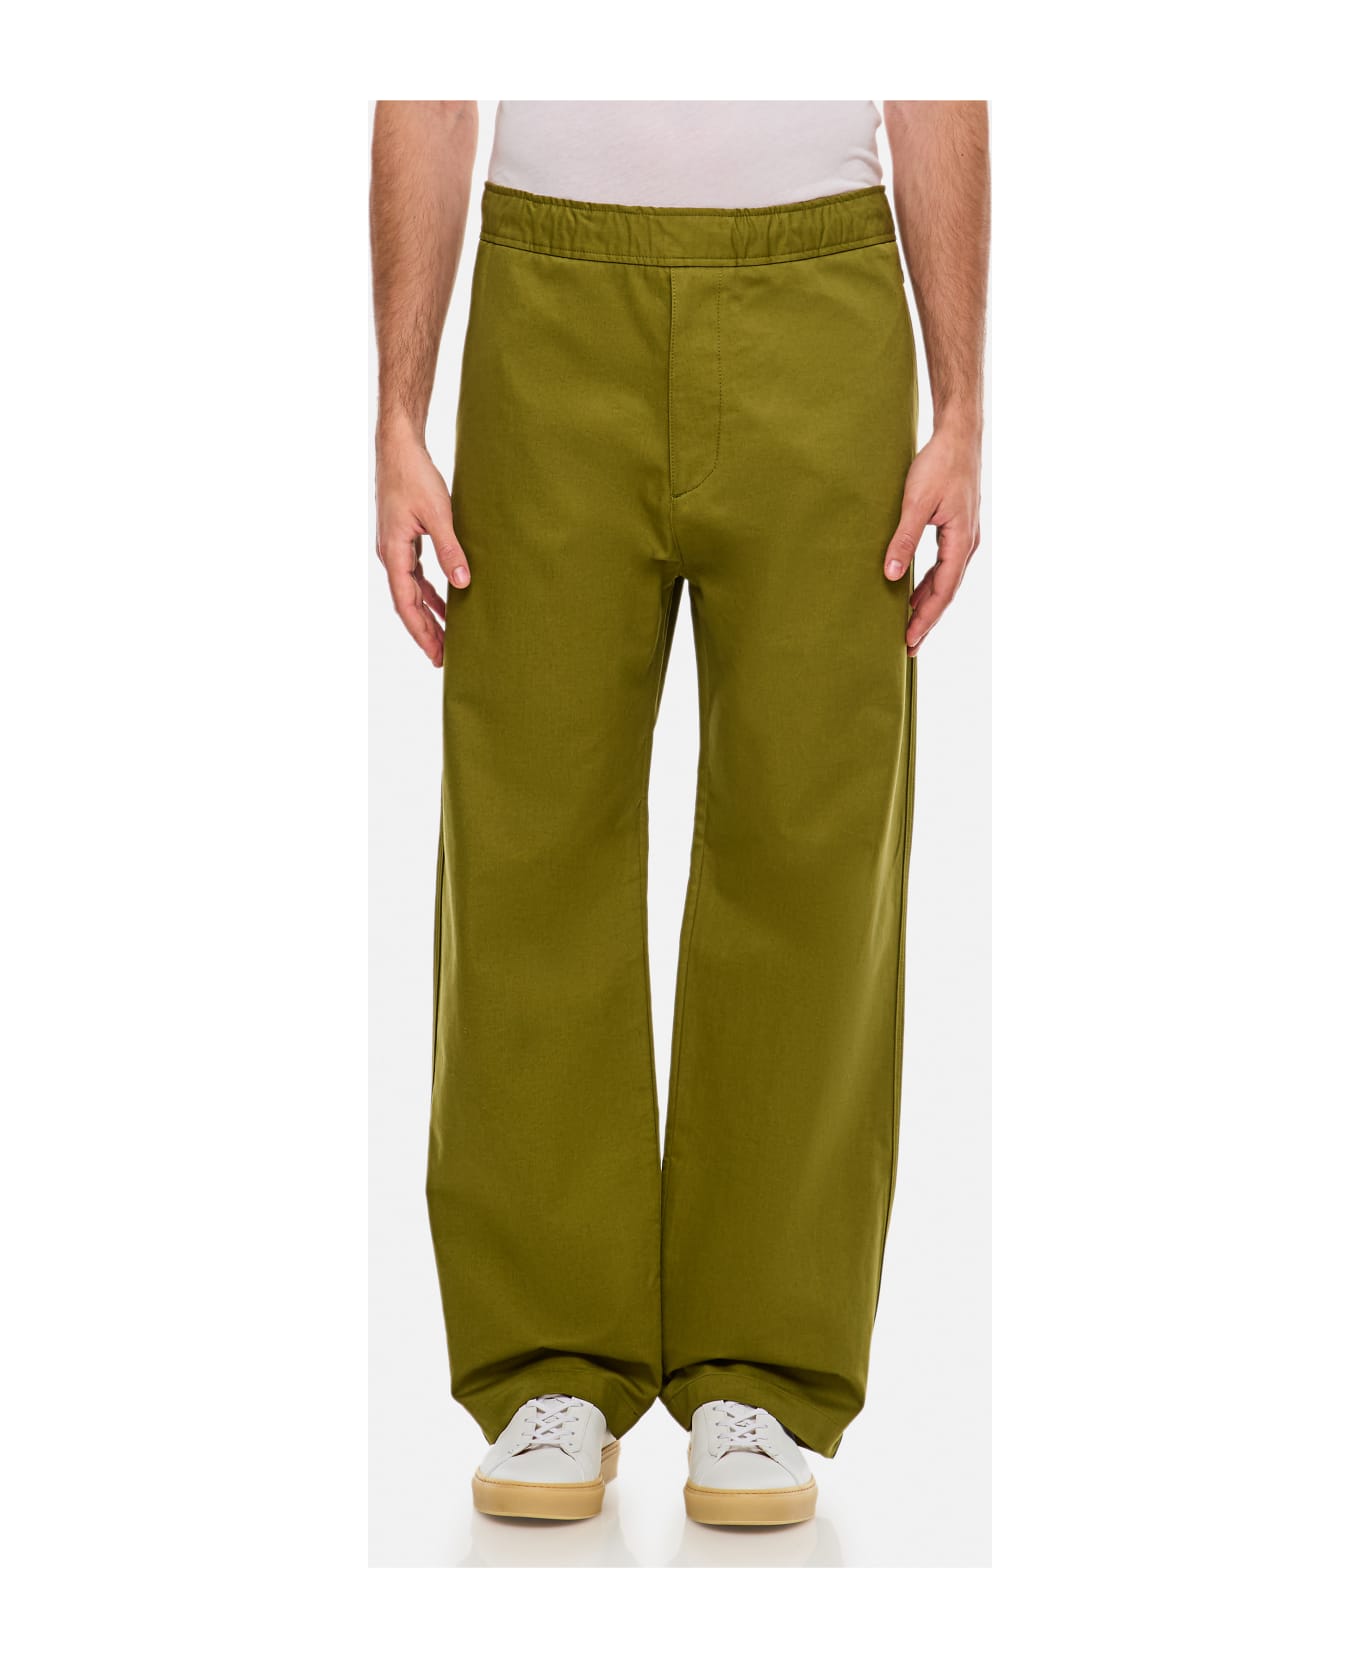 Moncler Trousers - Green